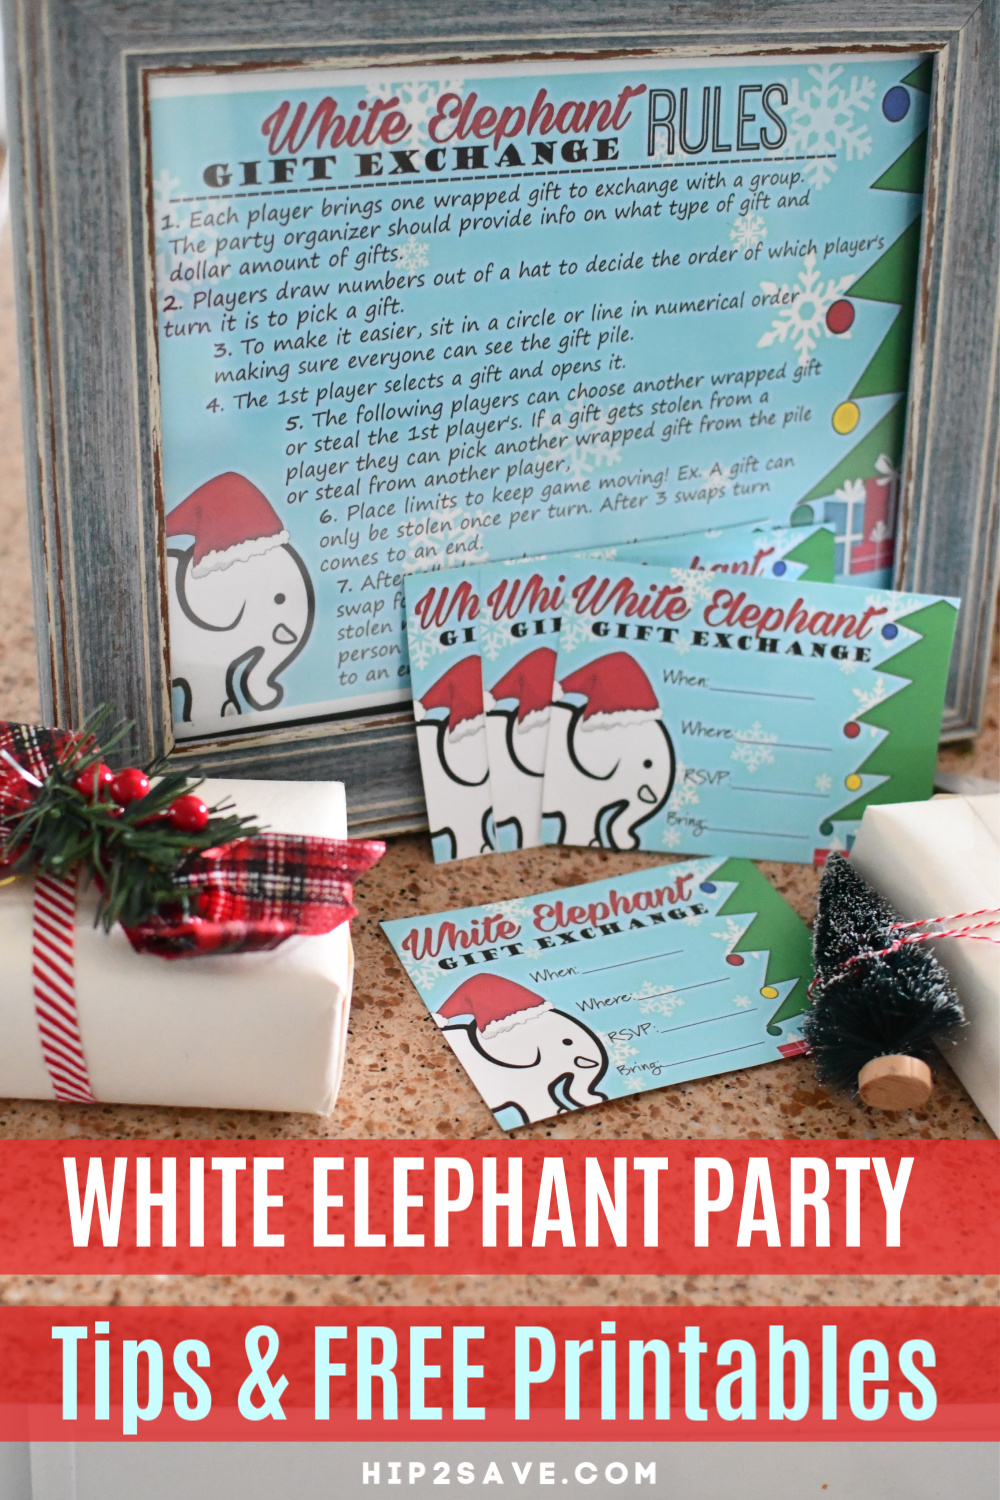 How to Throw a Rad White Elephant Party - Rules, Gift Ideas + a